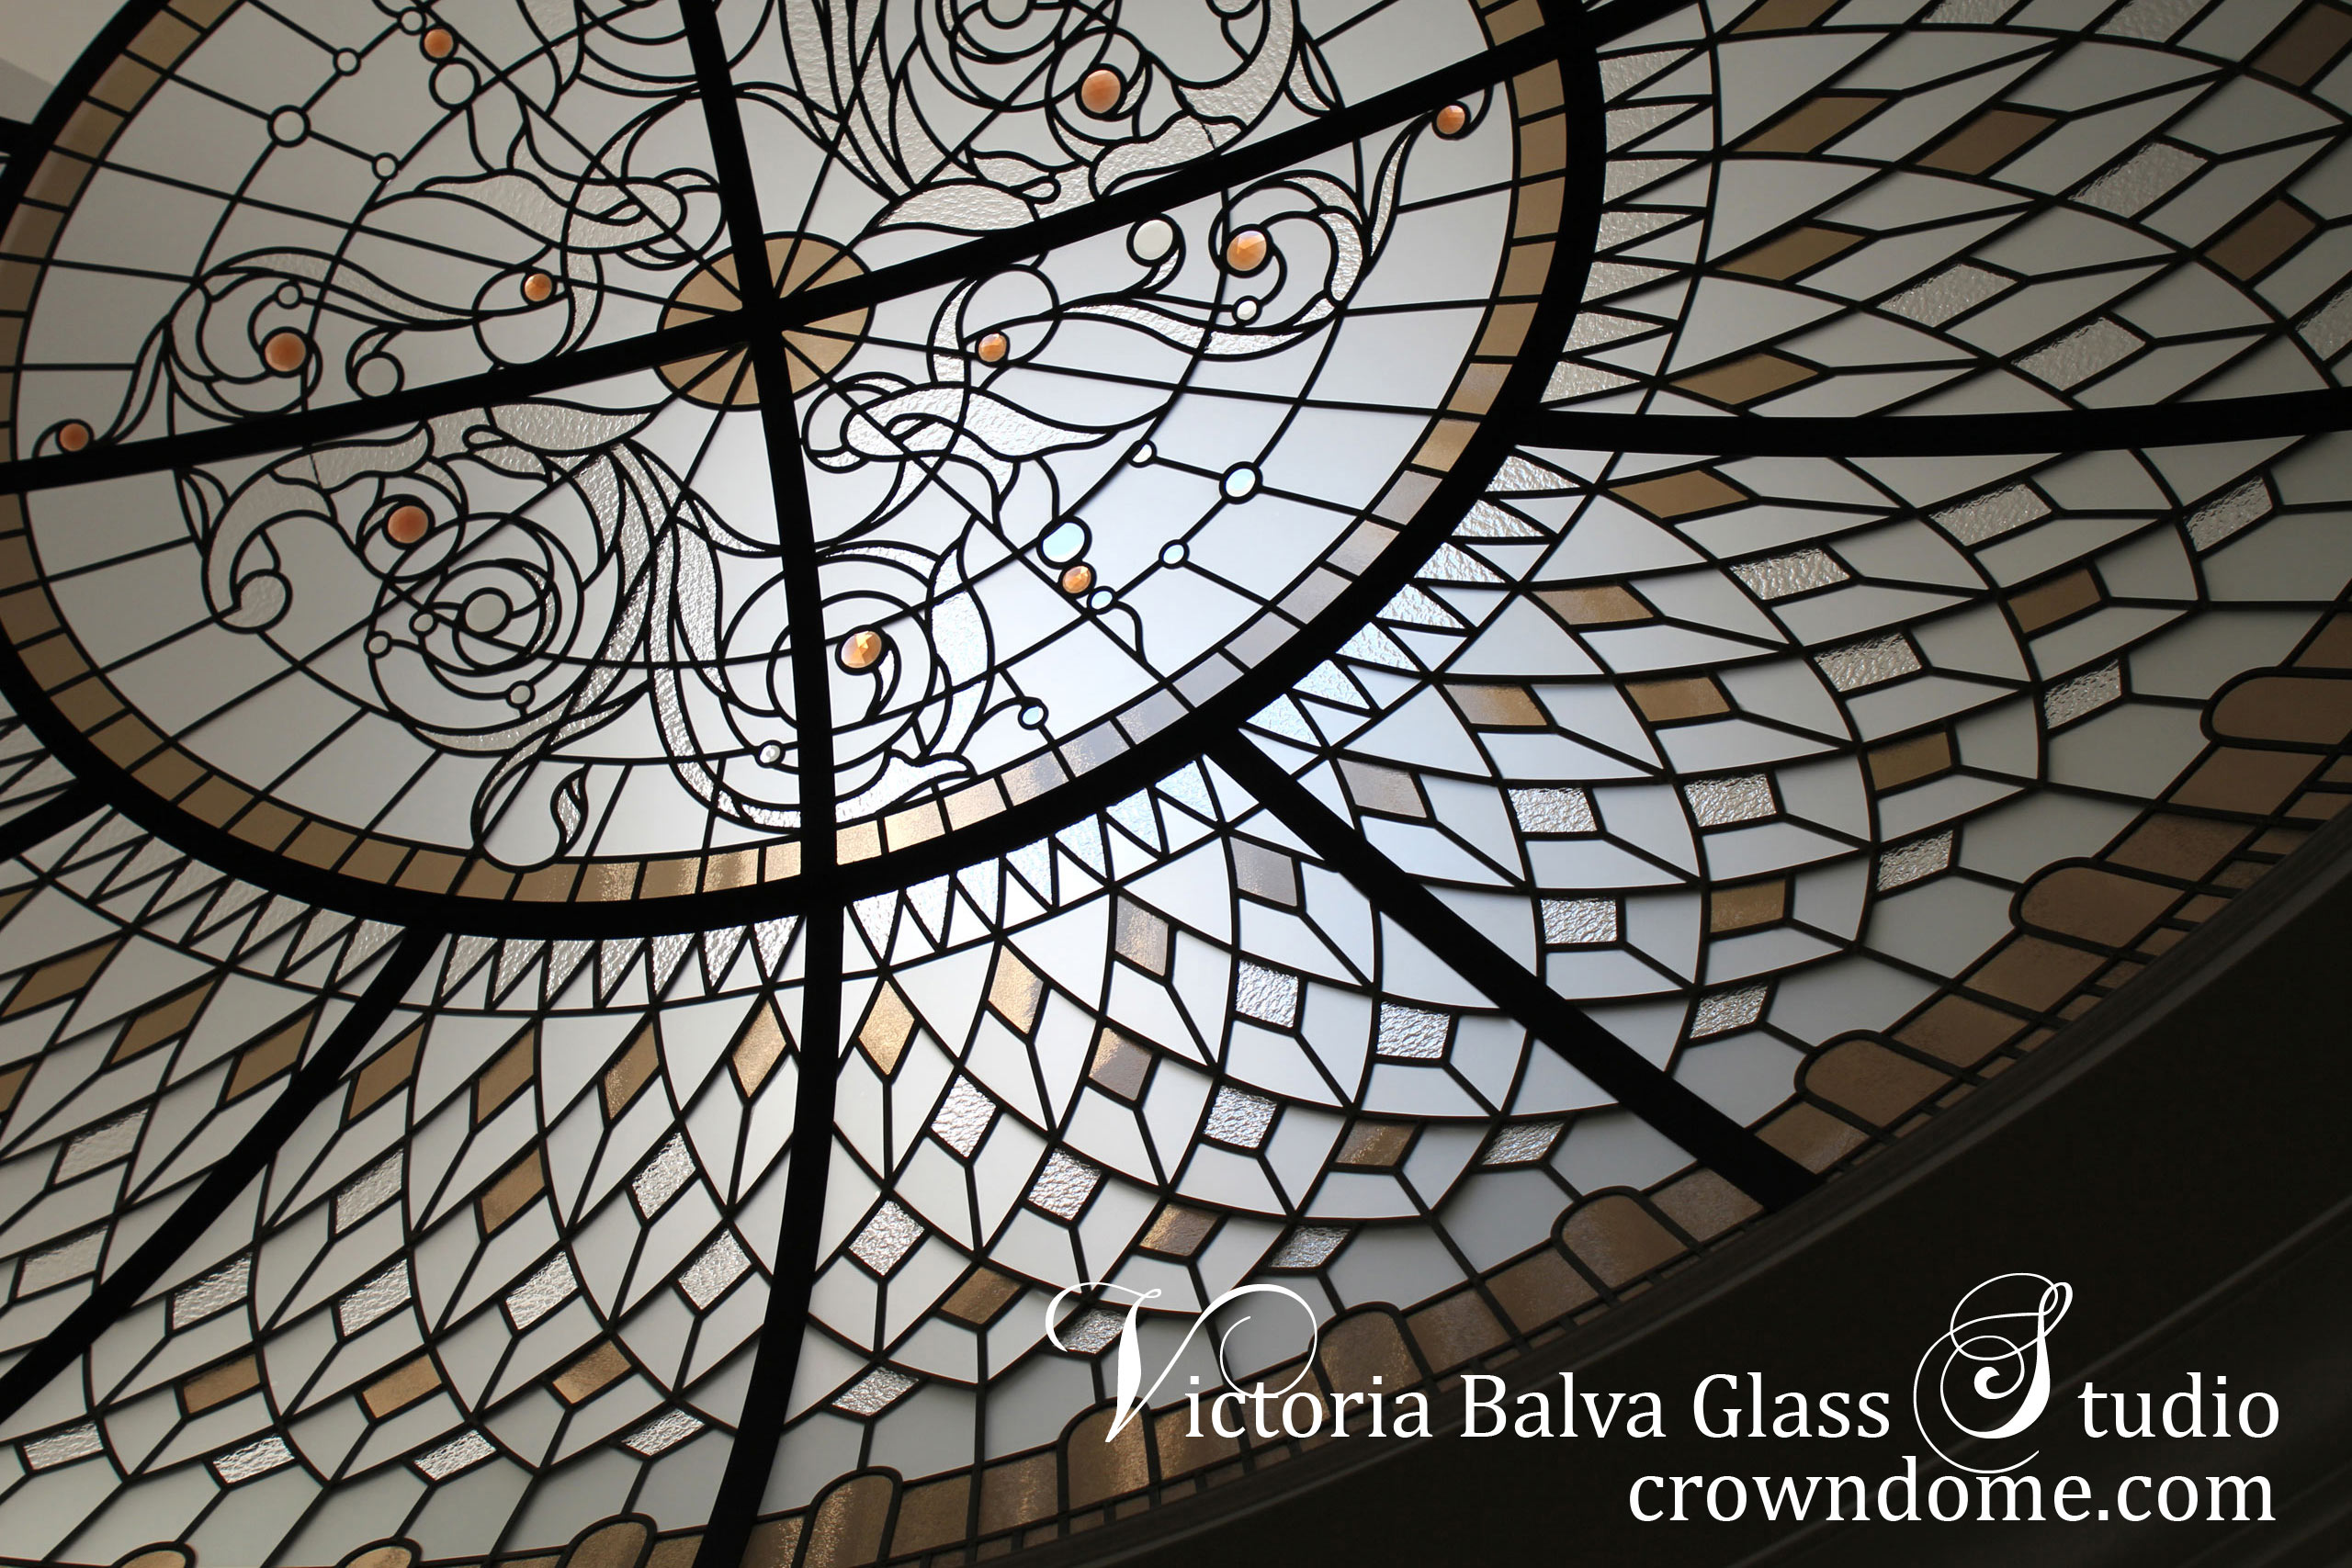 Oval stained leaded glass dome skylight ceiling with rosette ornament for an oval hallway of a custom built house. Large oval stained leaded glass dome skylight ceiling masterpiece with bronze textured glass and colored jewels.